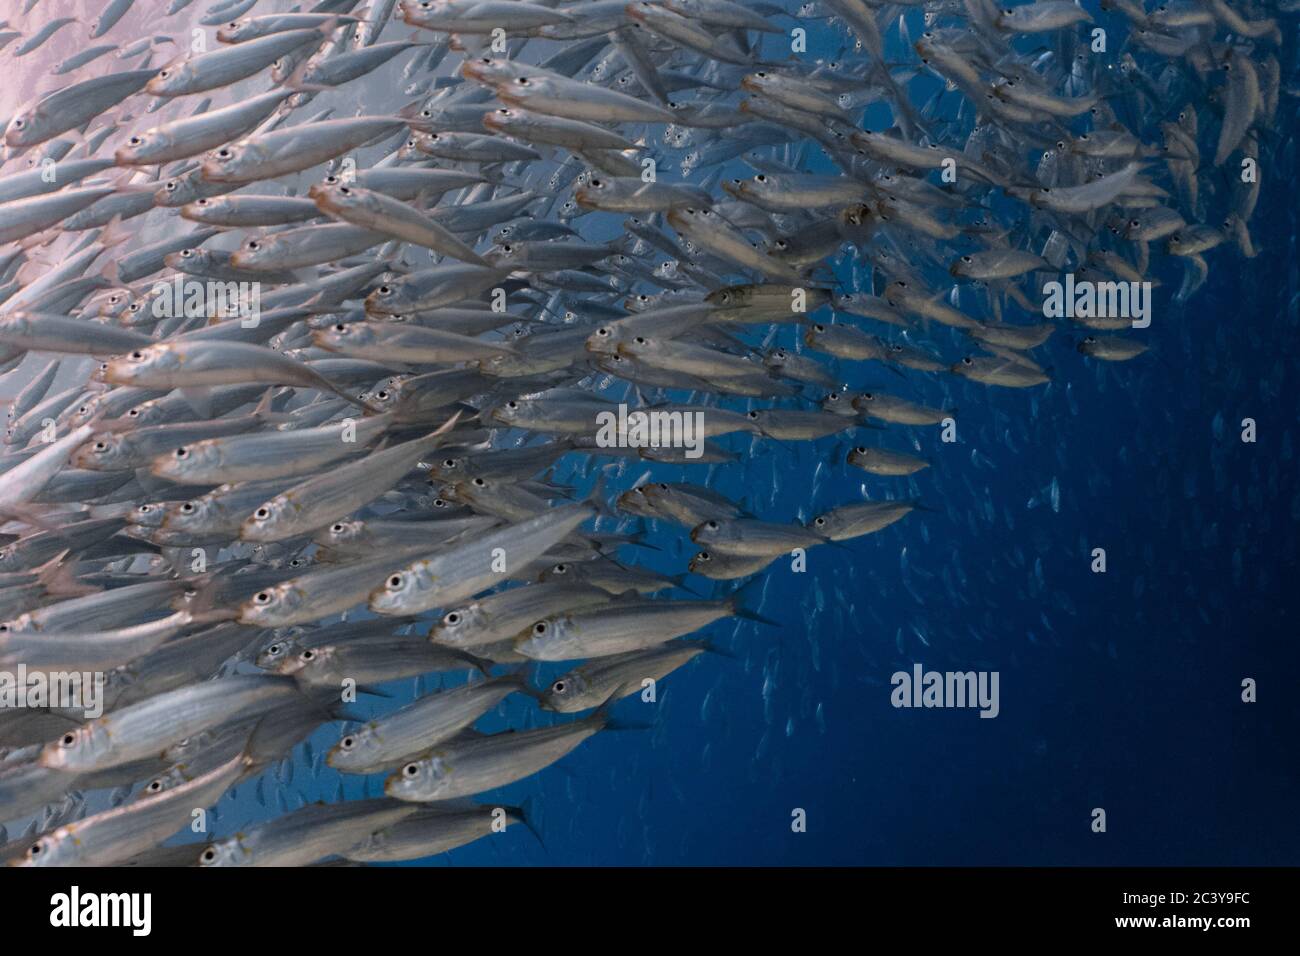 Massive school of sardines in a shallow reef. Sardine shoal in Moalboal is a famous tourist destination in the southern town of Cebu, Philippines Stock Photo